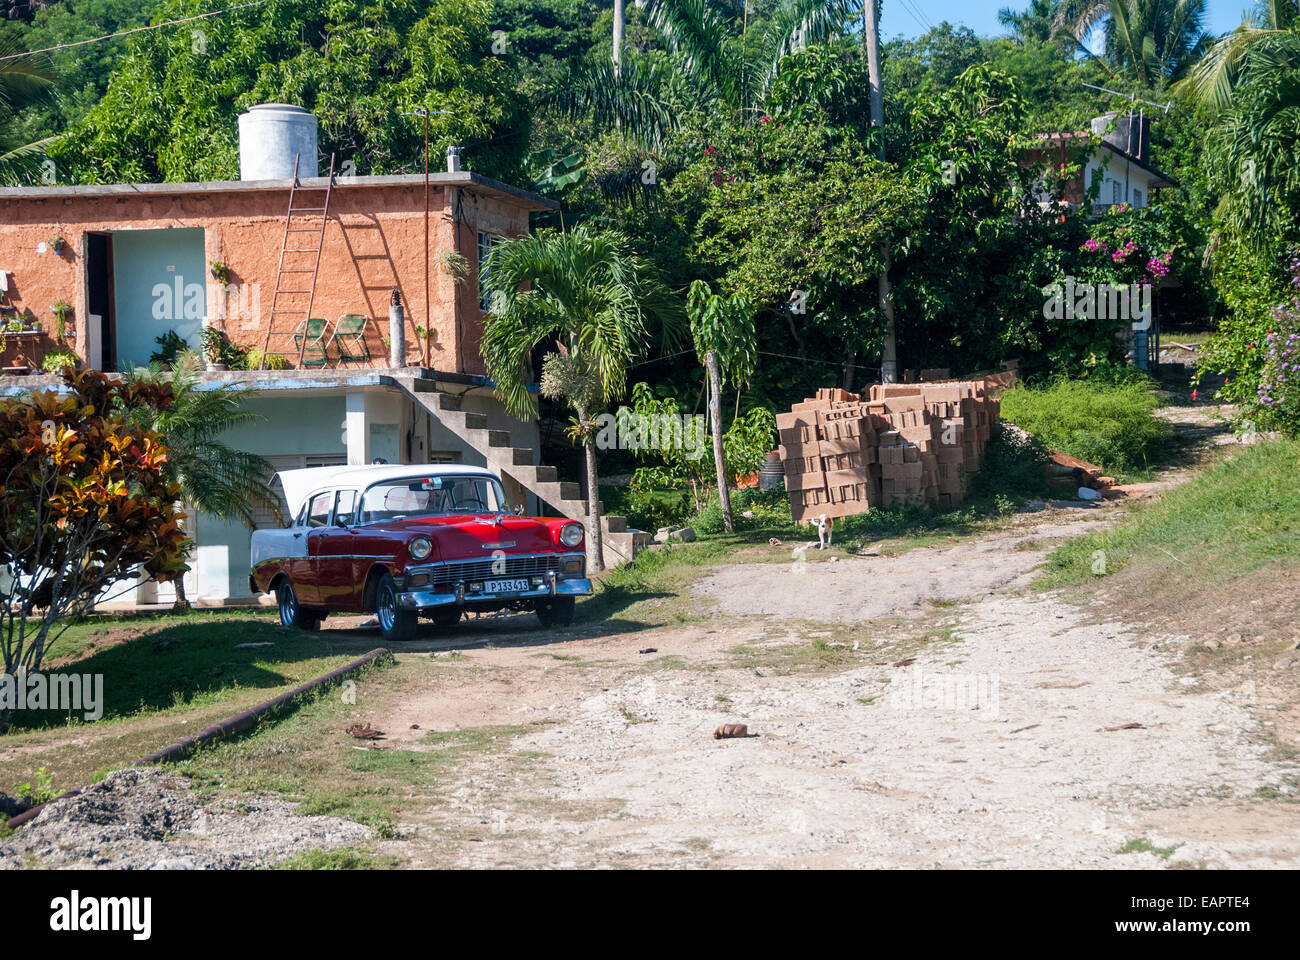 A vintage 1955 Chevrolet is a valuable and lucrative source of income for enterprising Cubans when used in the tourist trade. Stock Photo